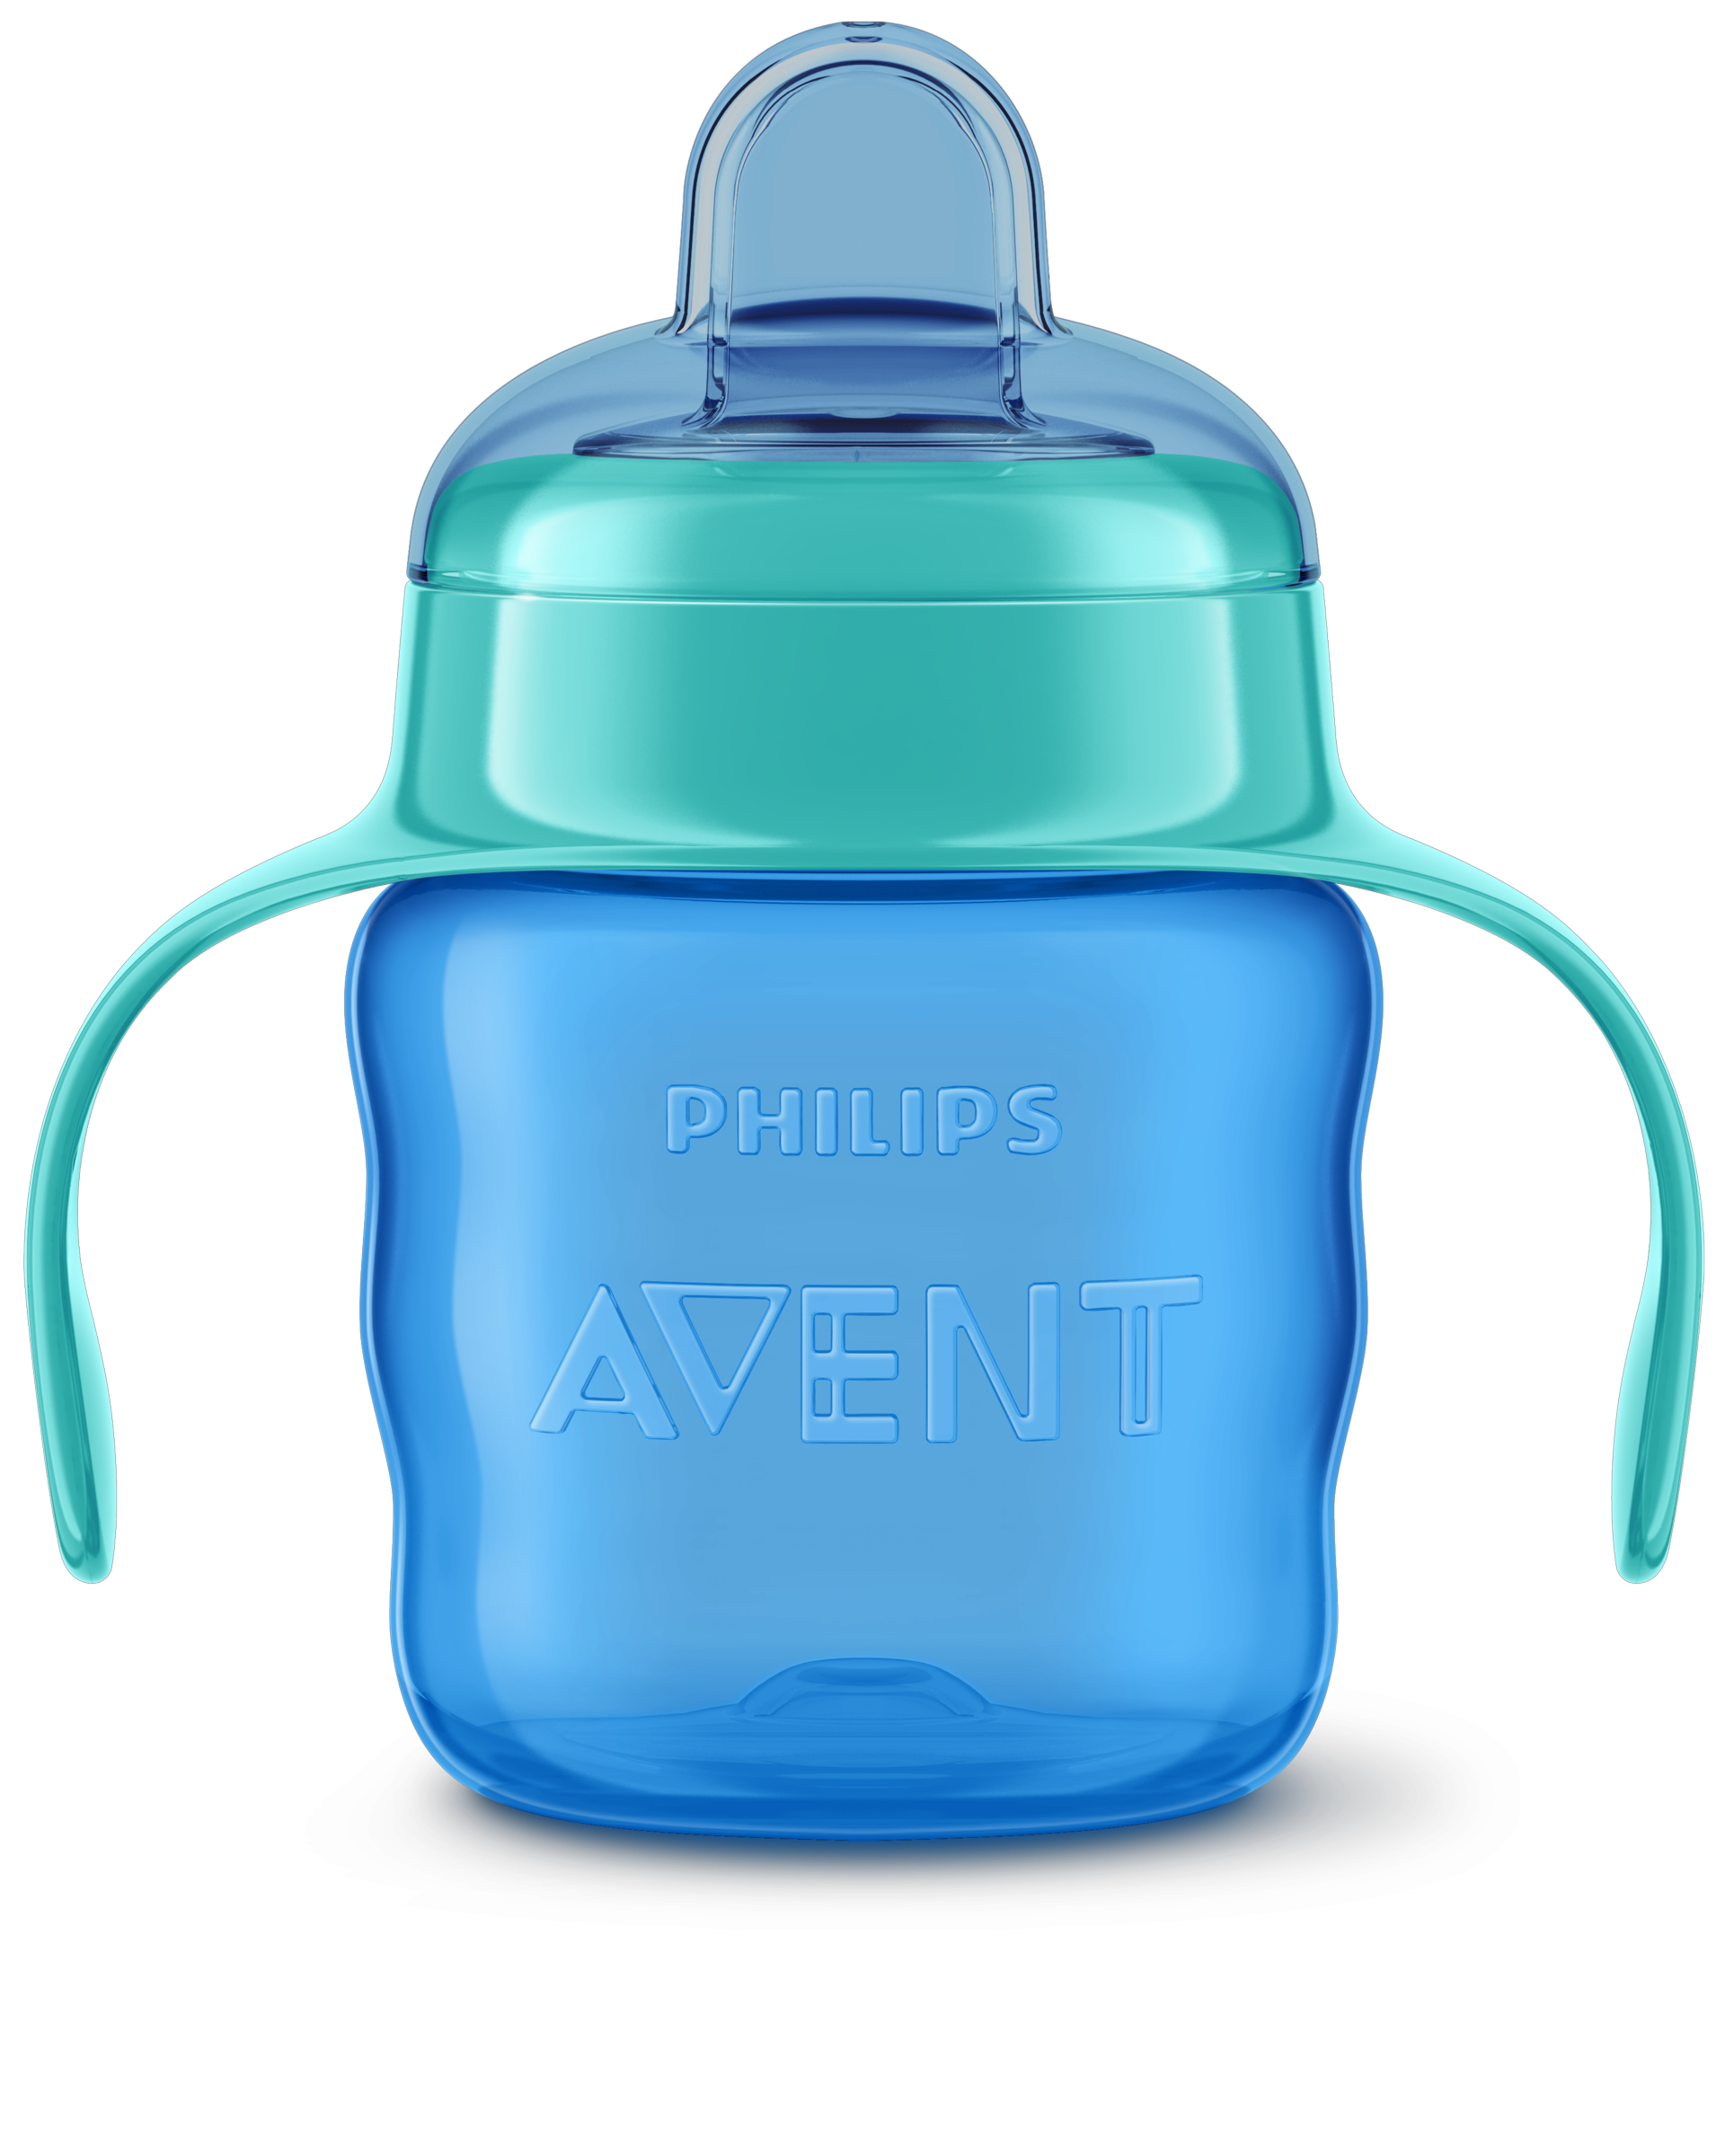 Avent Classic Spout Cup With Handles 200 ml Blue & Green